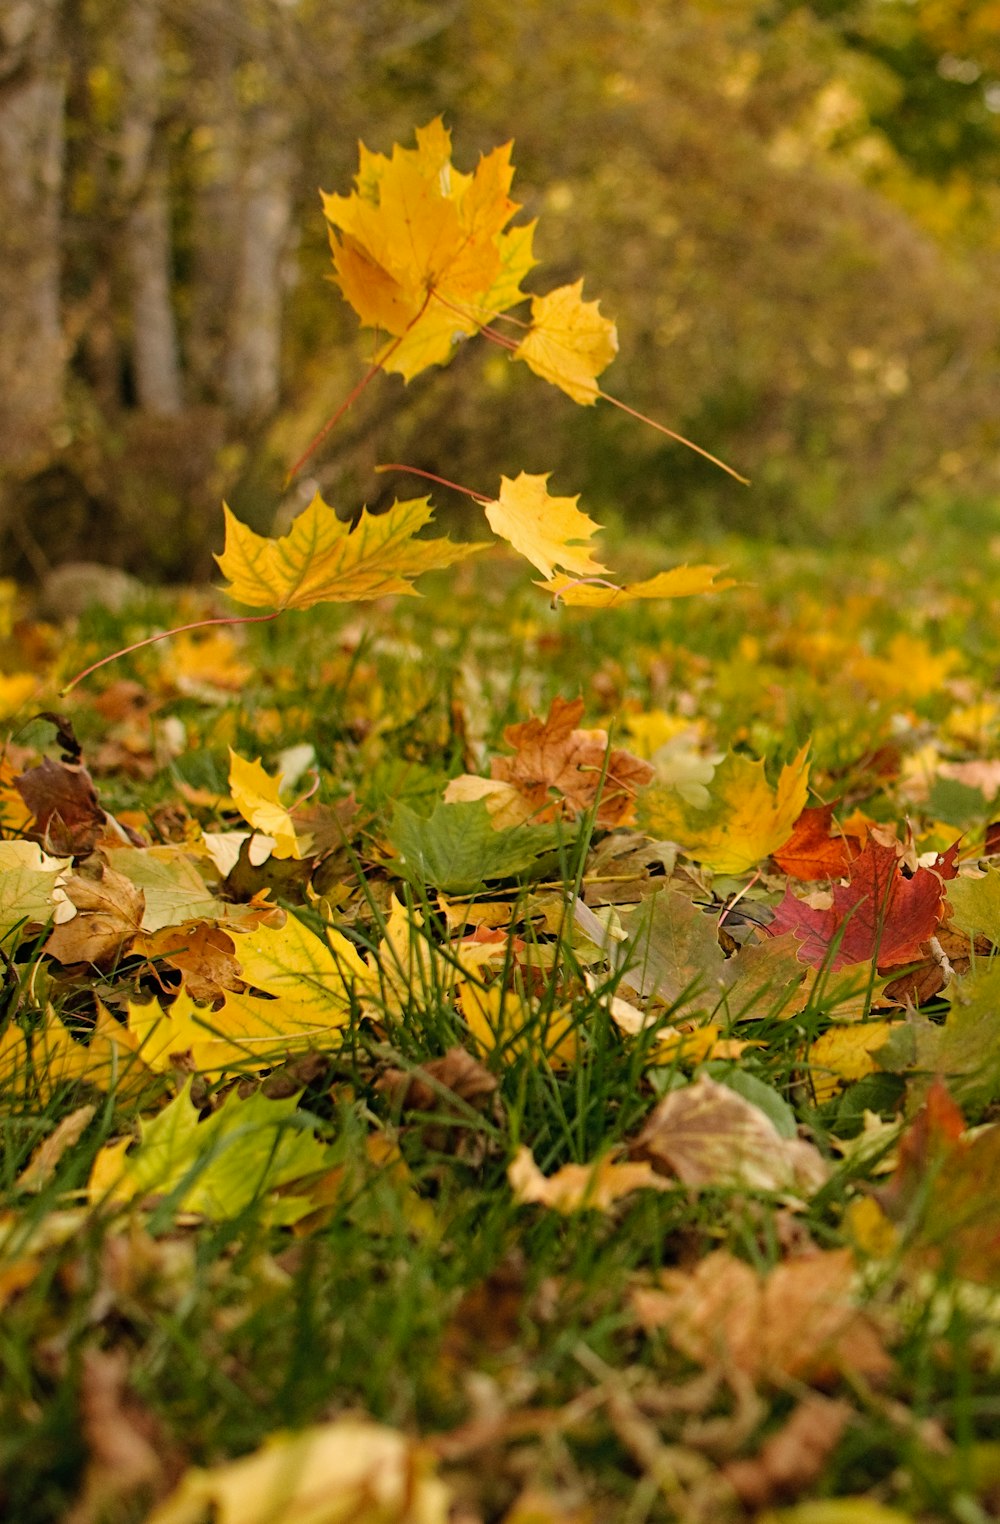 brown and yellow maple leaves on green grass during daytime